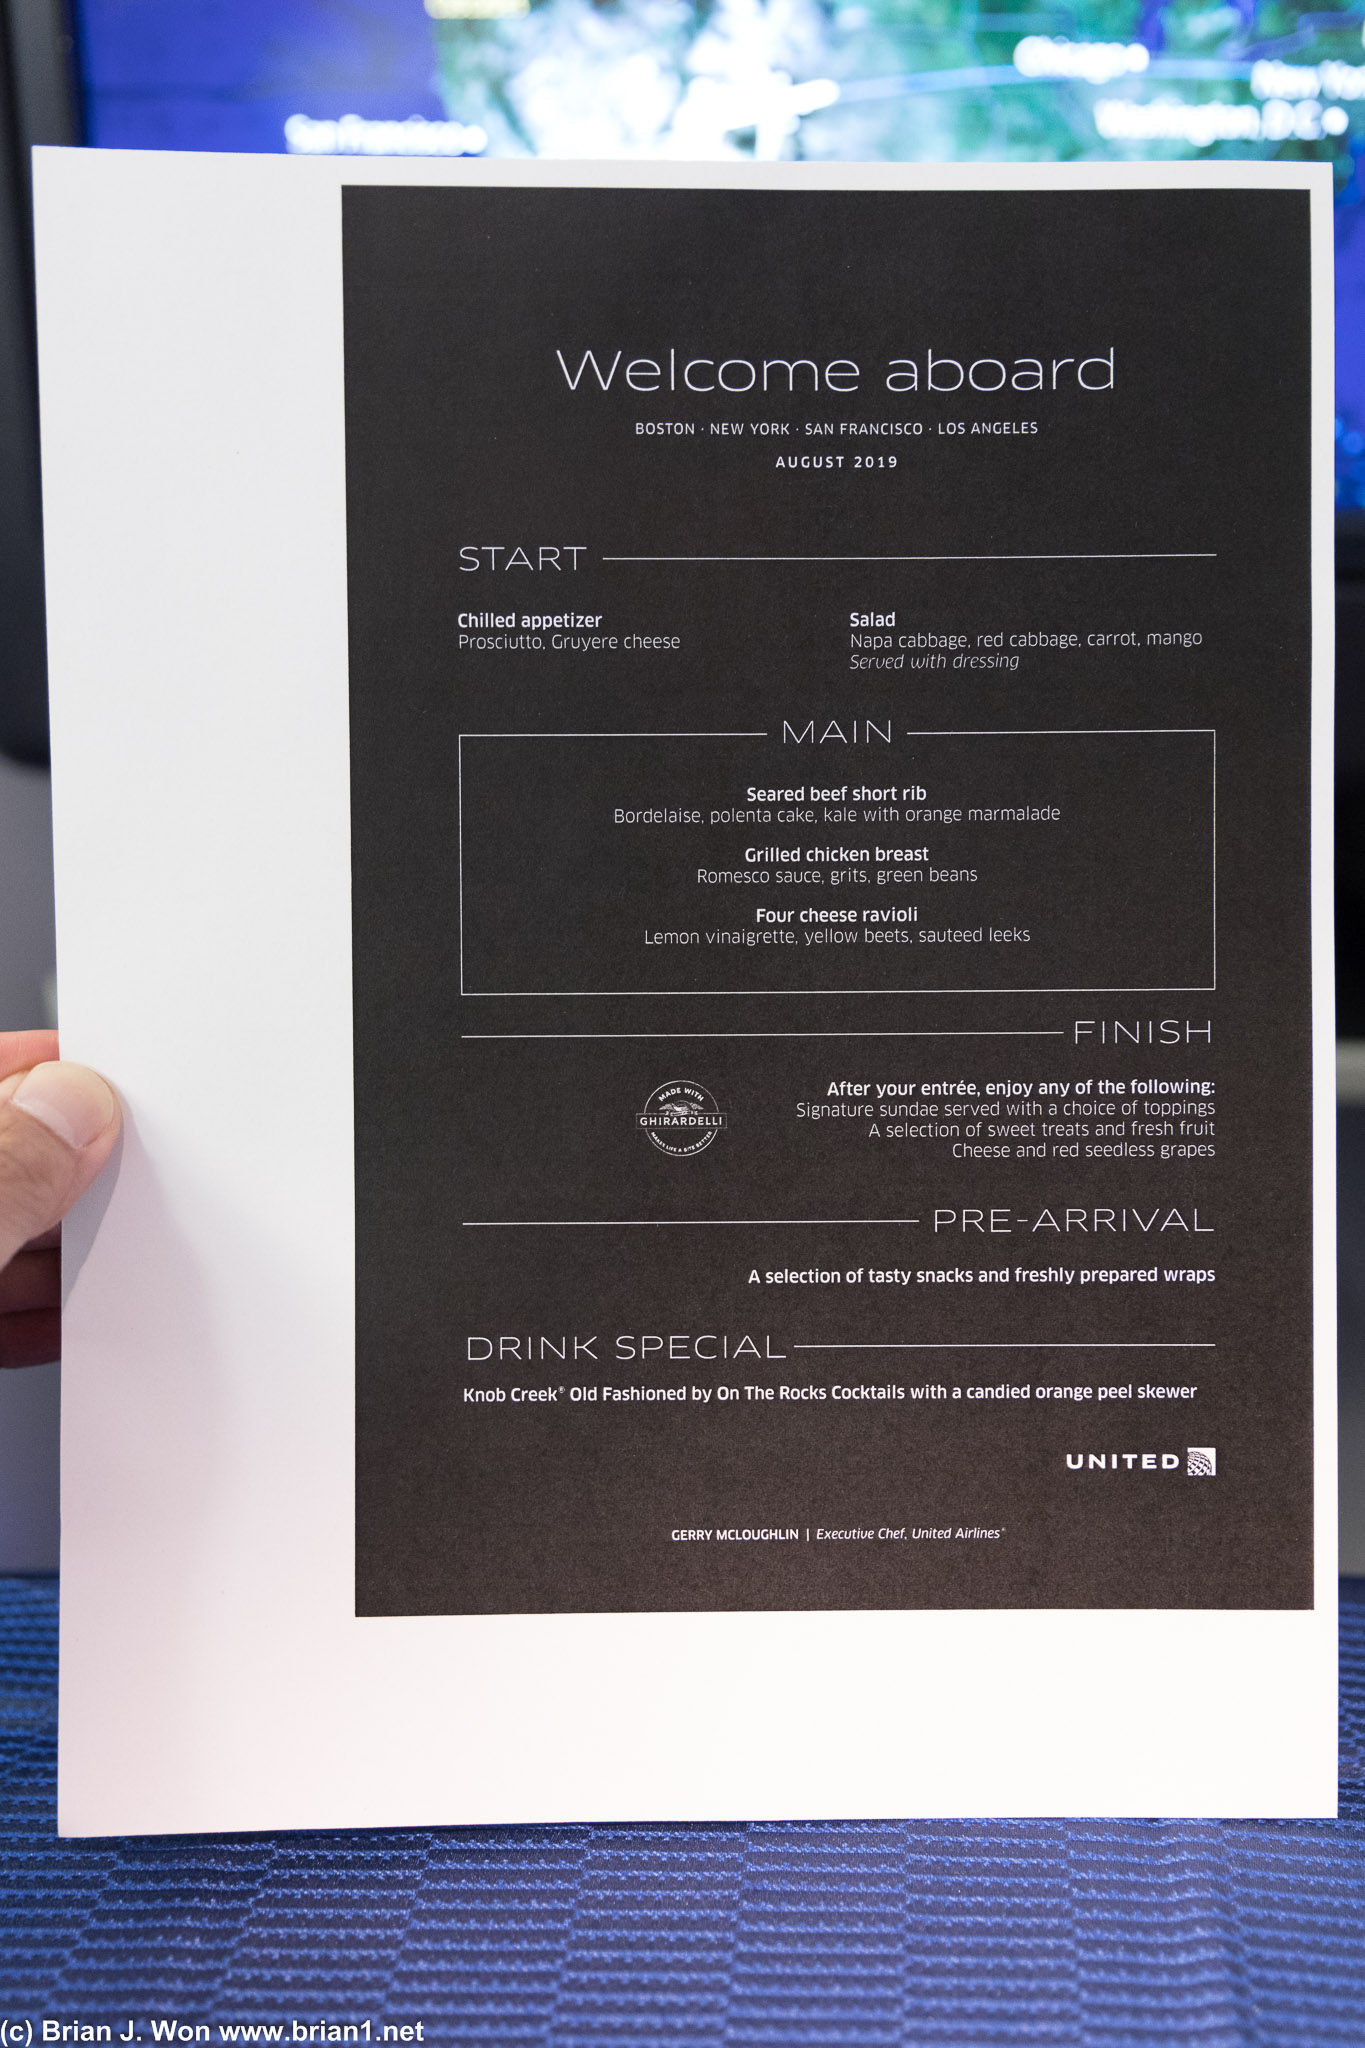 Can United not even order menus on the correct size paper?